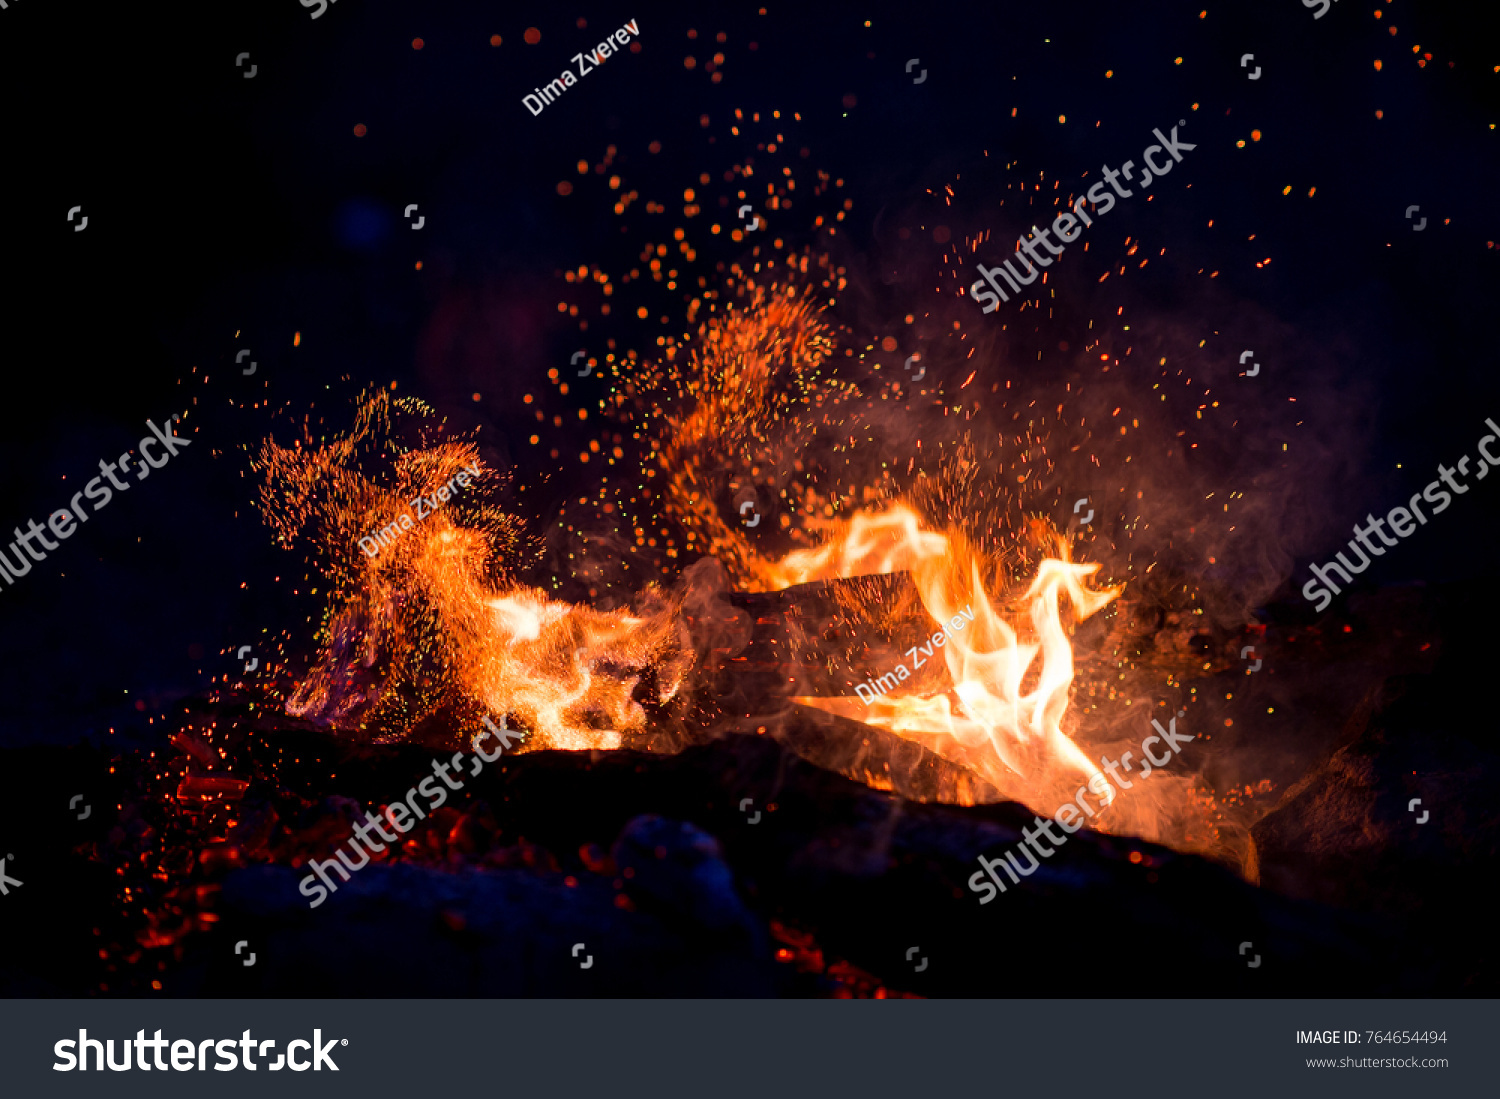 Burning woods with firesparks, flame and smoke. Strange weird odd elemental fiery figures on black background. Coal and ash. Abstract shapes at night. Bonfire outdoor on nature. Strenght of element #764654494